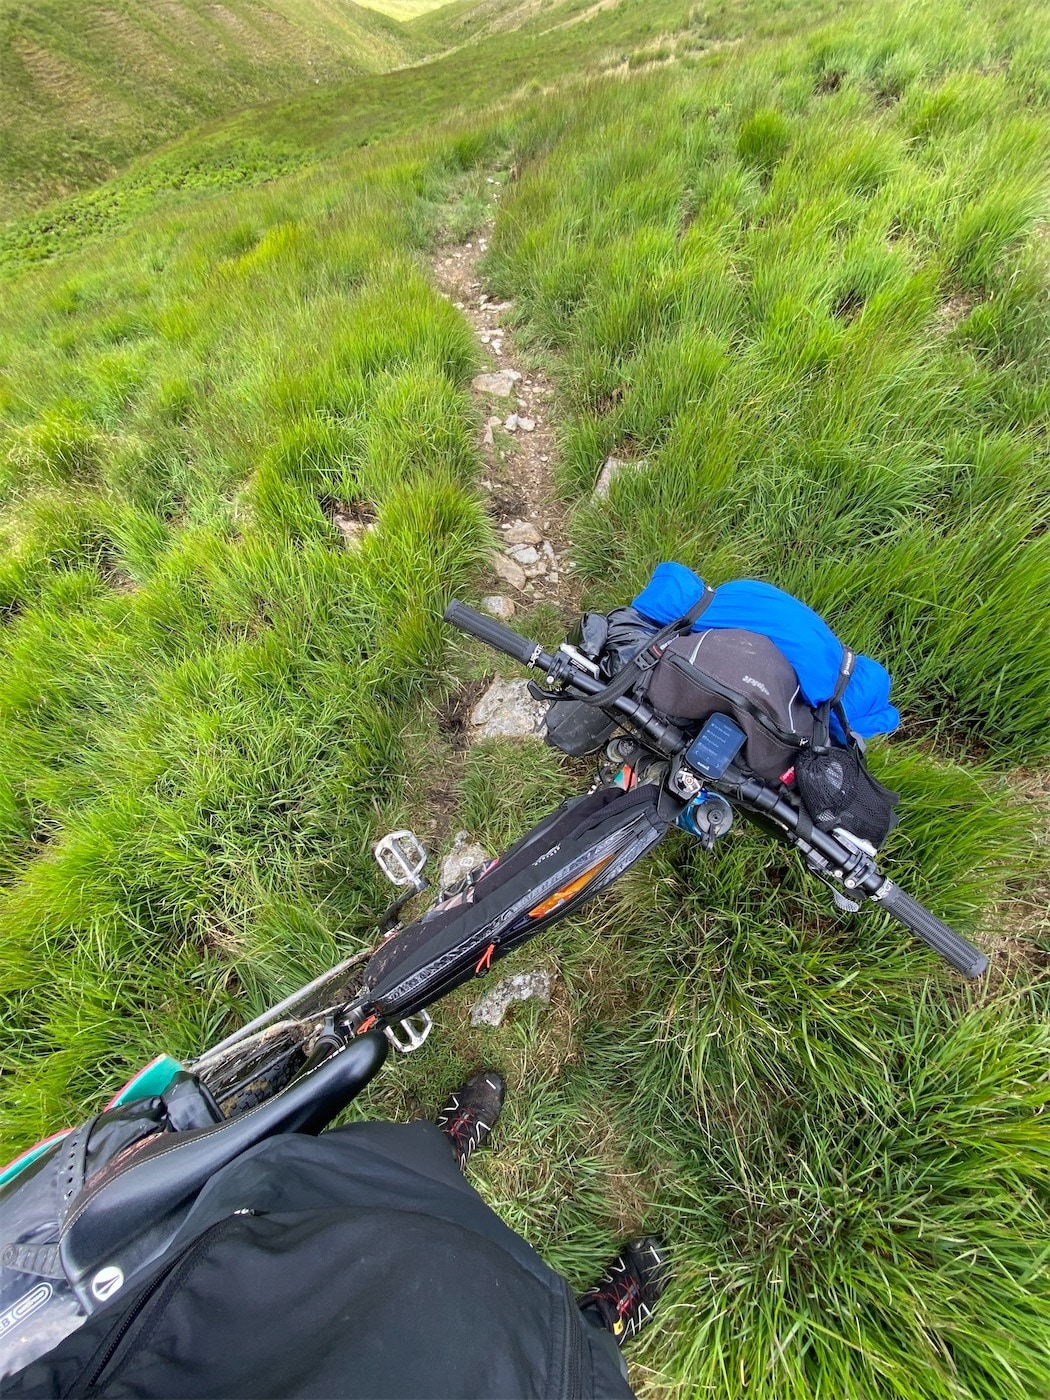 This inocuous looking section of trail resulted in me coming very close to going over the bars